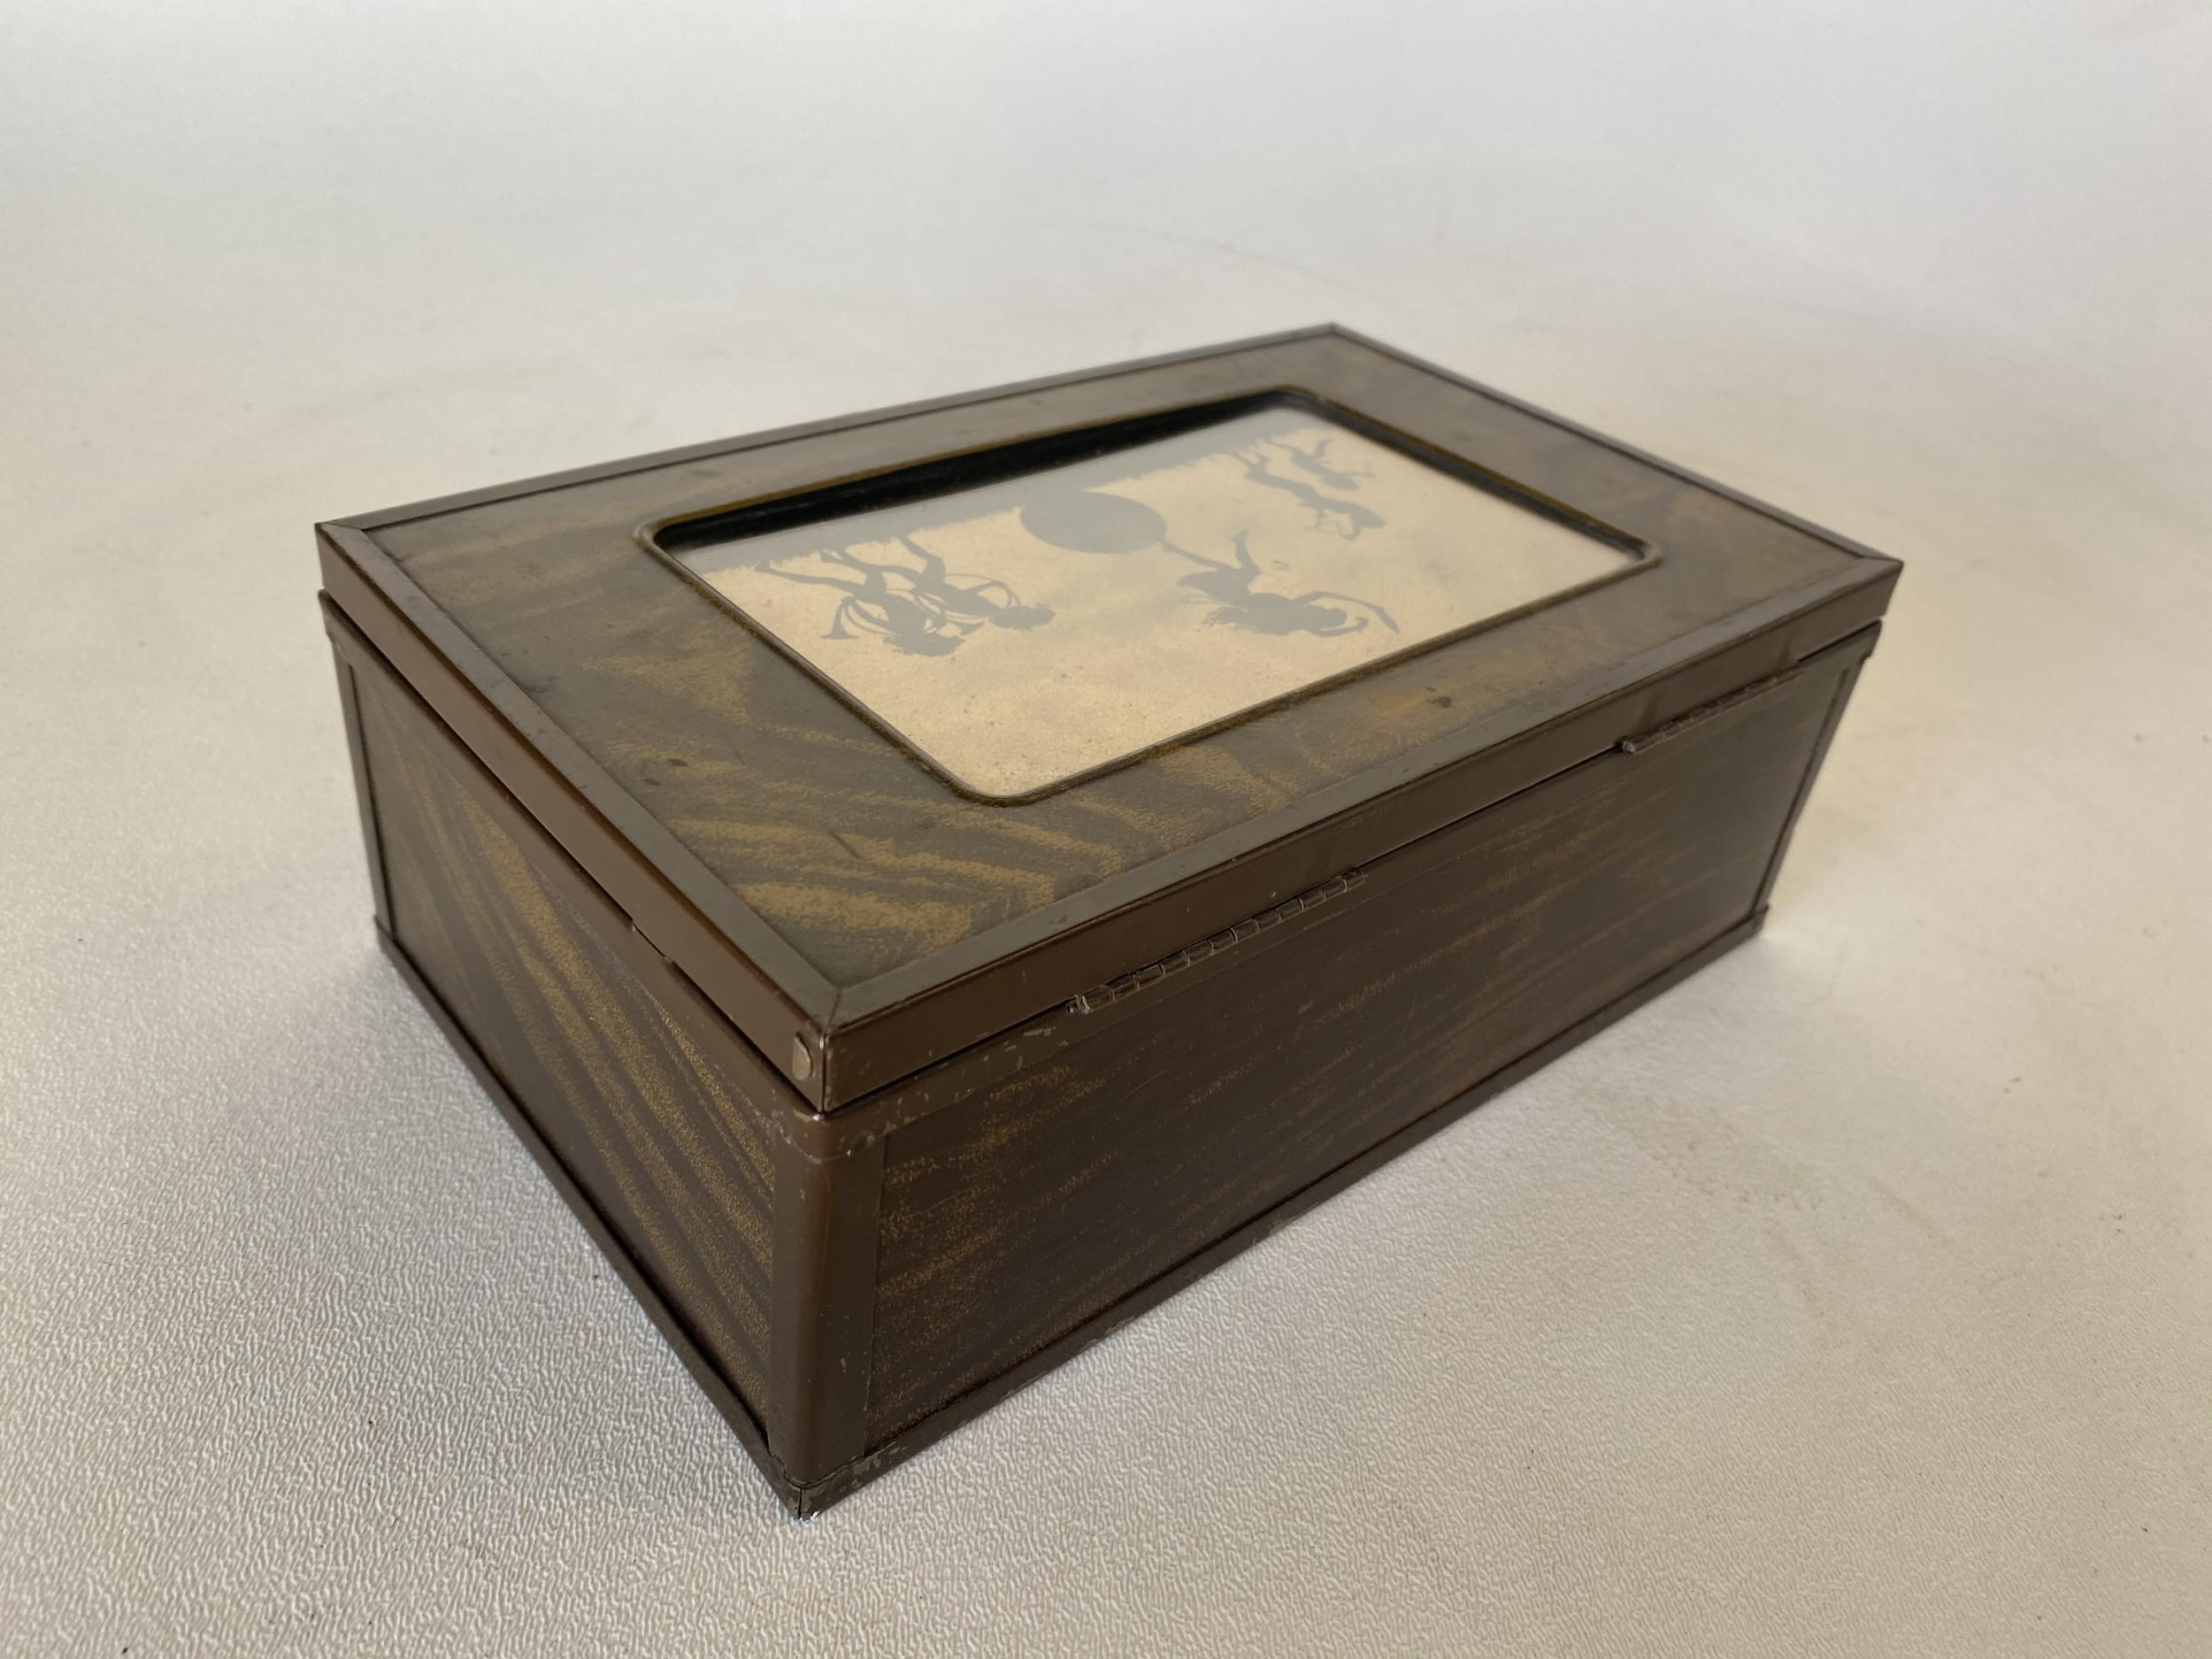 Early 20th turn of the century wood jewelry box with an enameled metal edge, red velvet interior, and small vanity mirror. The top features a small 